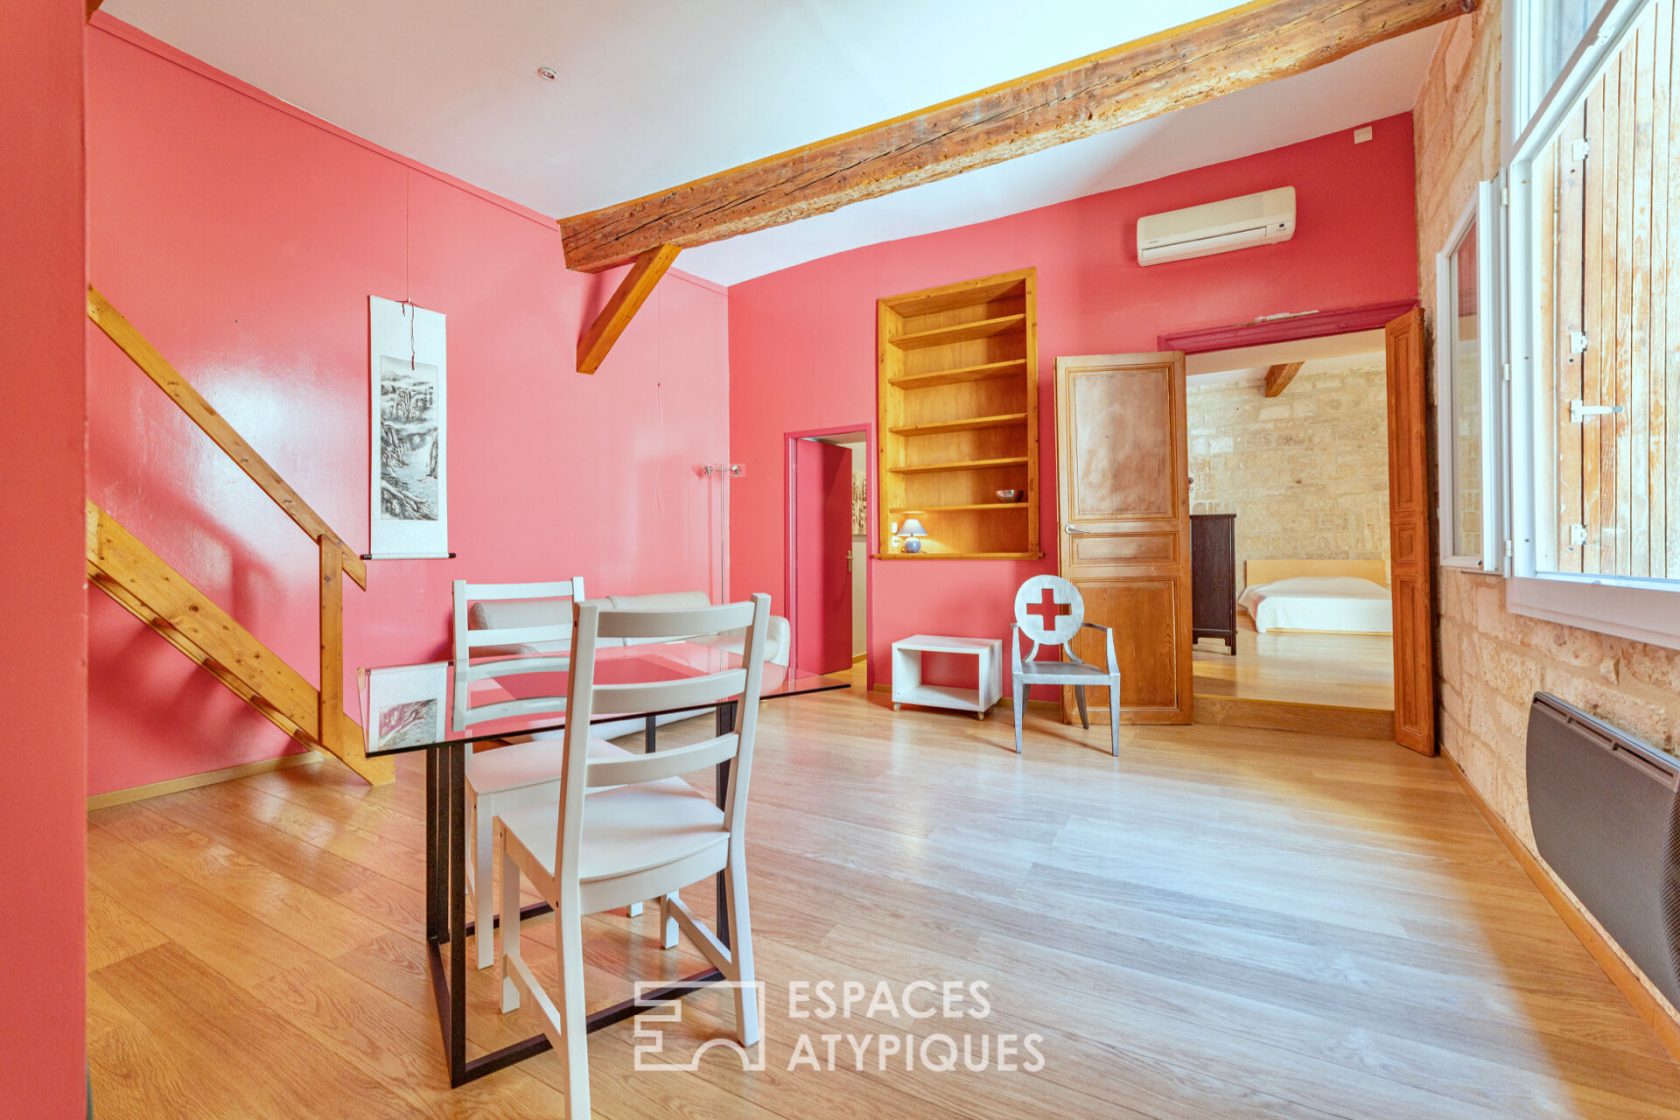 The ideal pied-à-terre in the heart of the Ecusson